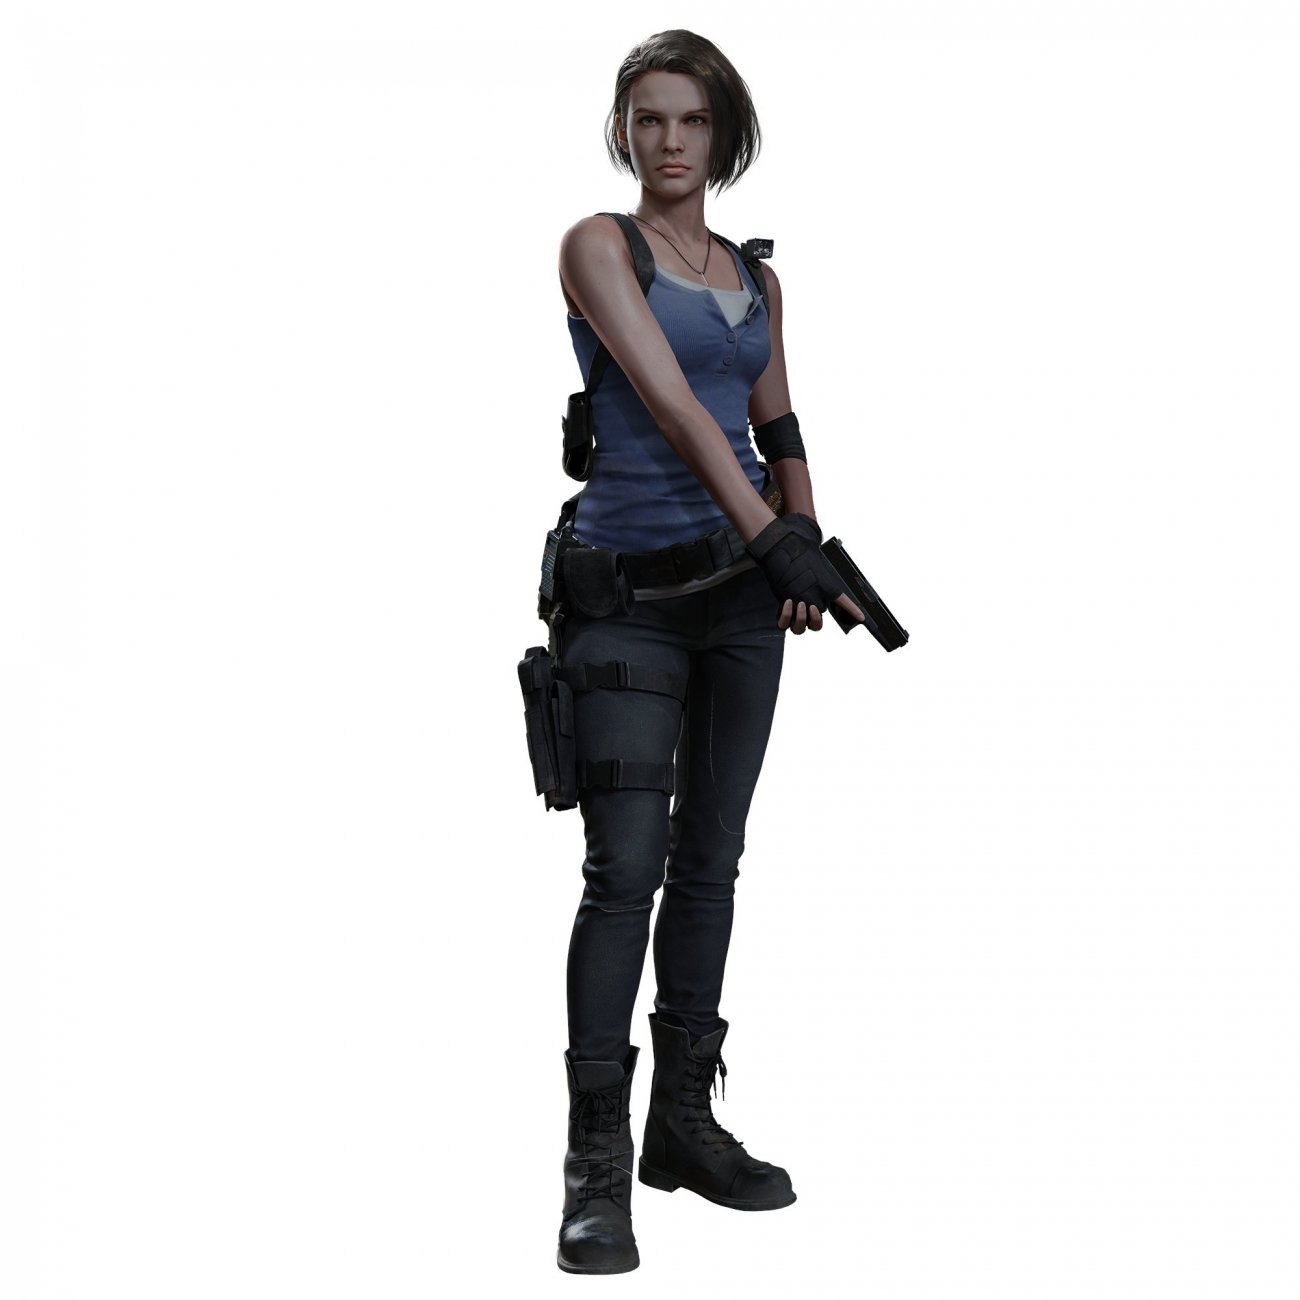 RE3 Remake, Jill Valentine - Character & Voice Actress